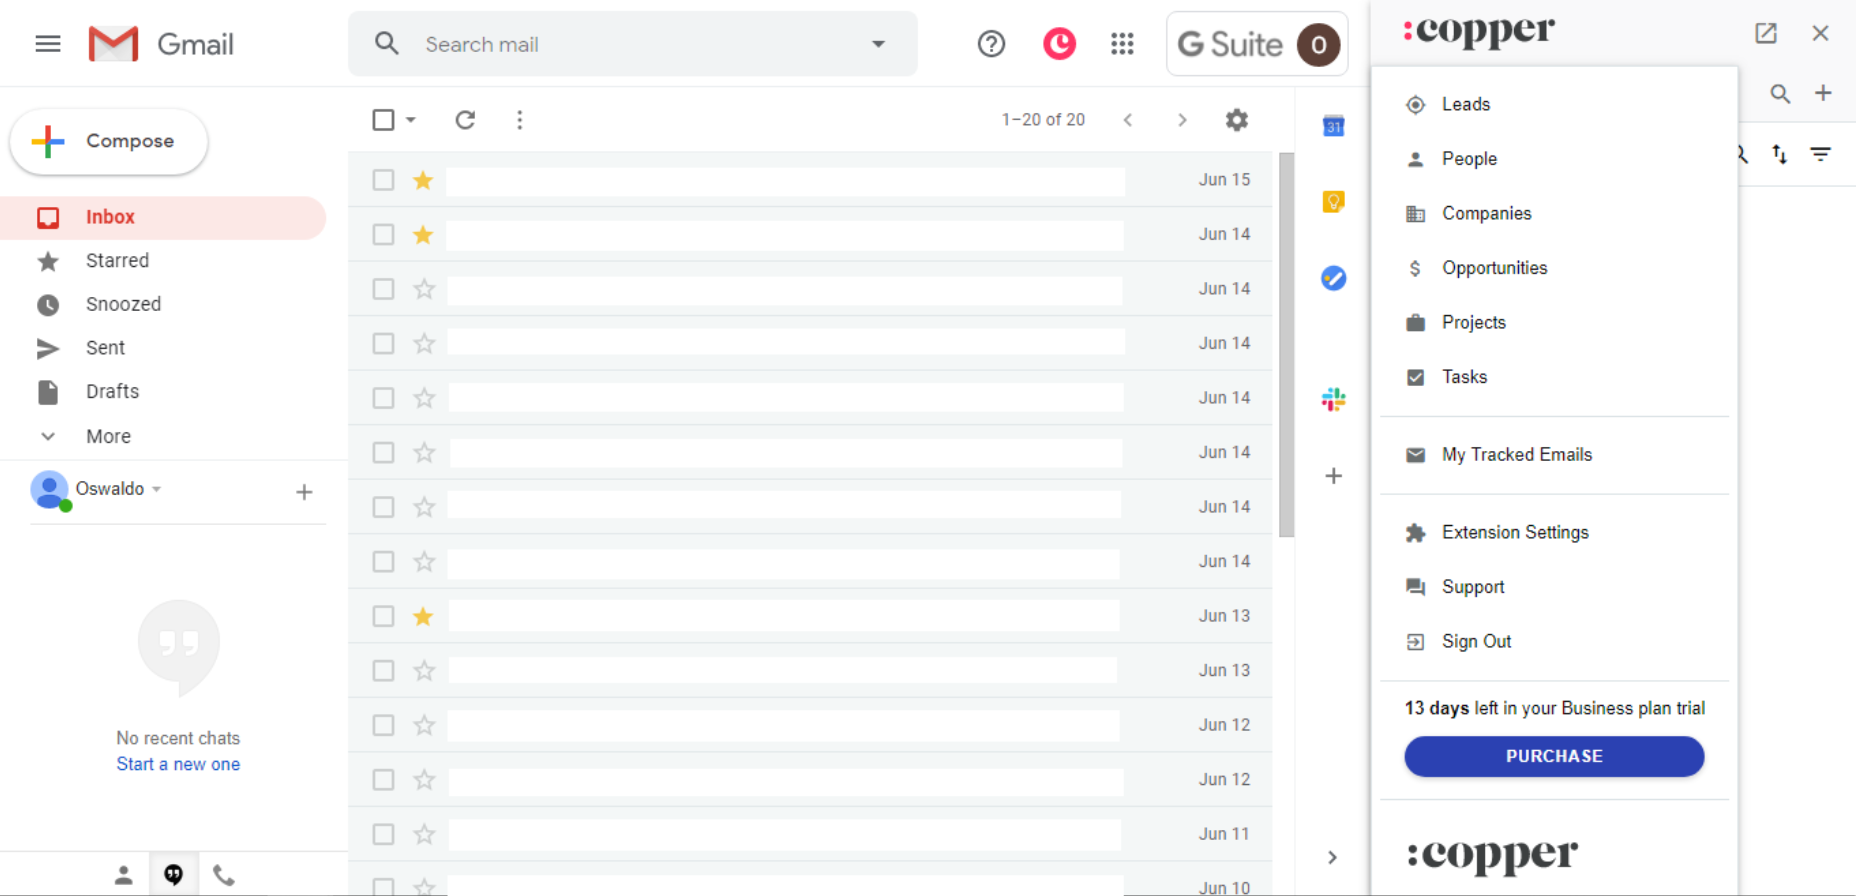 Copper gmail view with sidebar